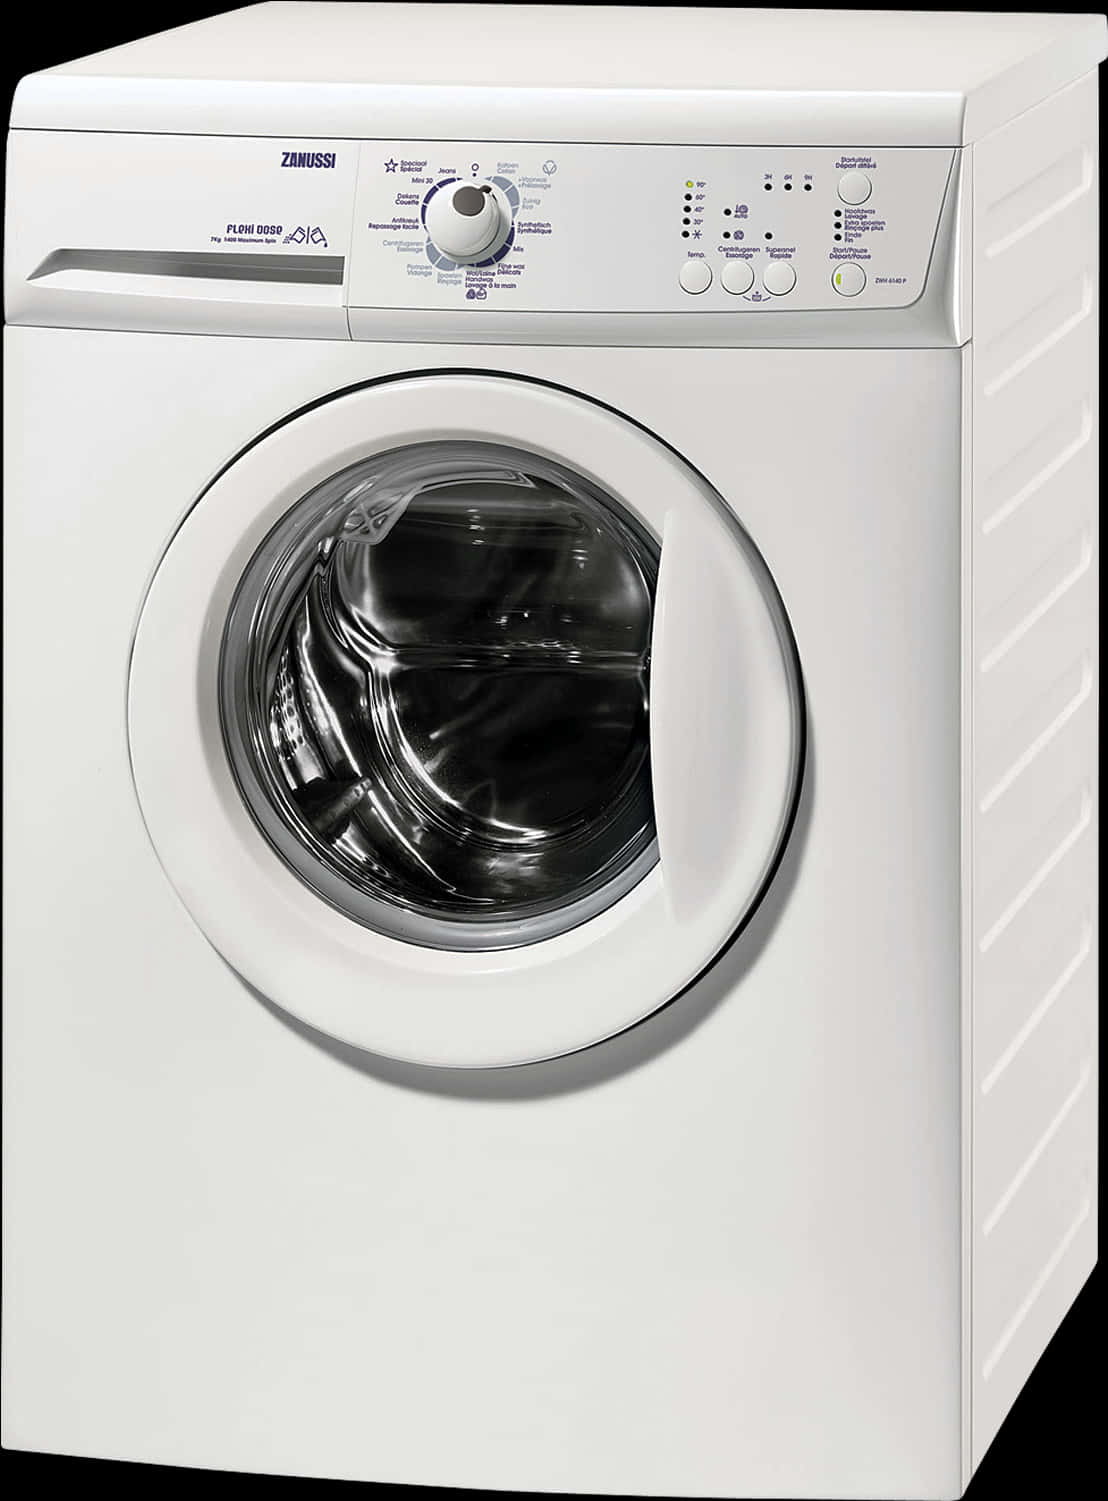 A White Washing Machine With Buttons